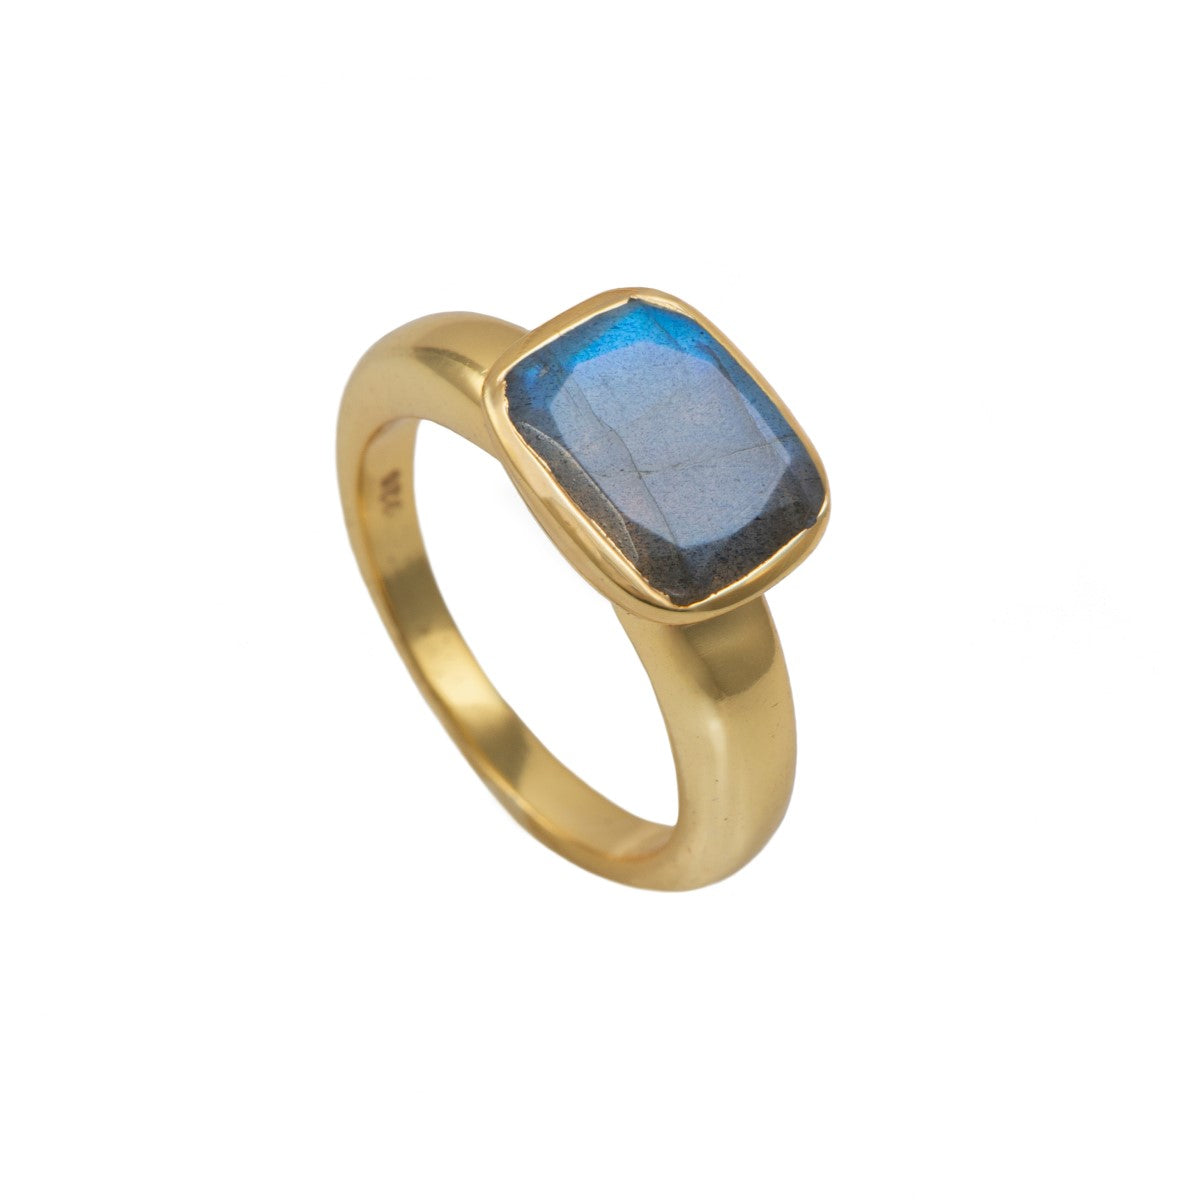 Faceted Rectangular Cut Natural Gemstone Gold Plated Sterling Silver Ring - Labradorite